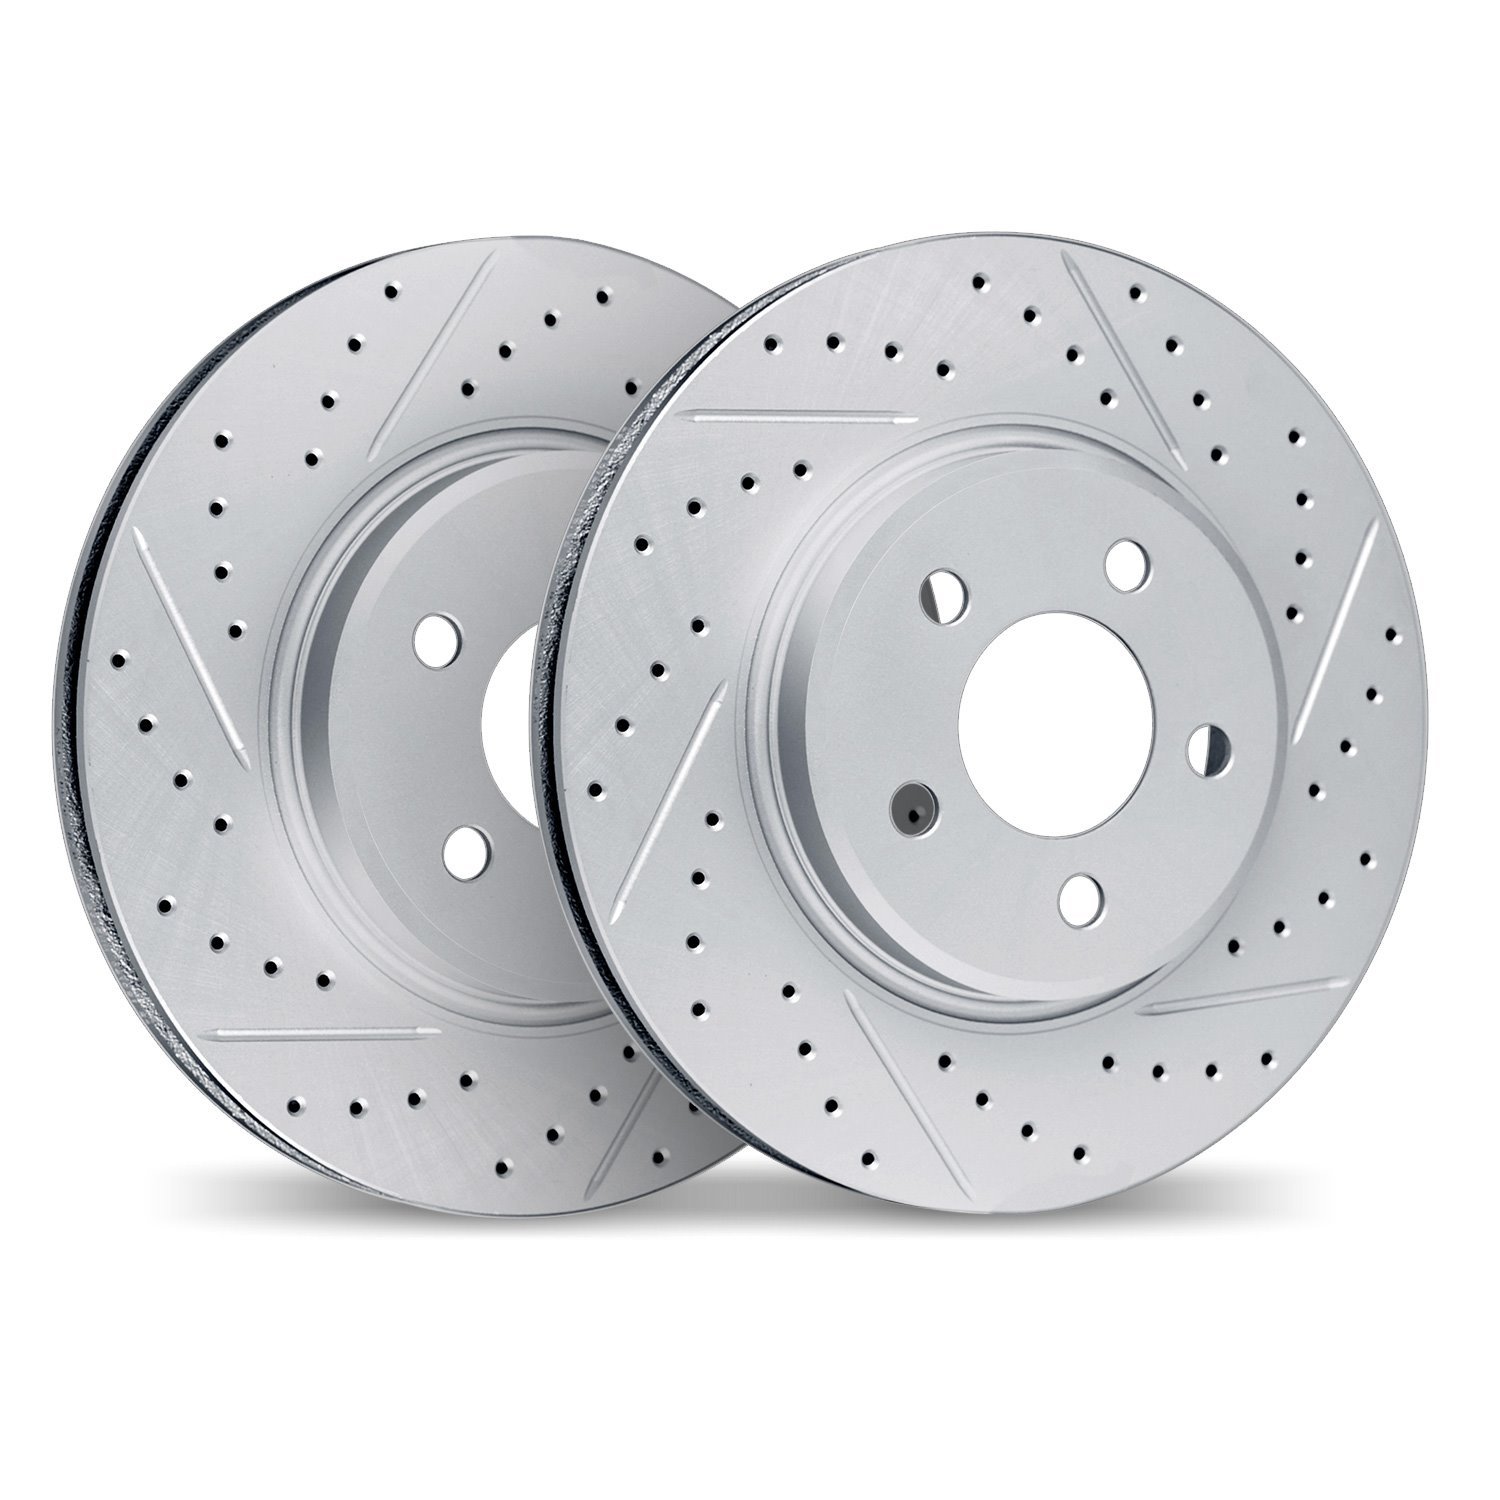 2002-32009 Geoperformance Drilled/Slotted Brake Rotors, 2015-2019 Mini, Position: Front